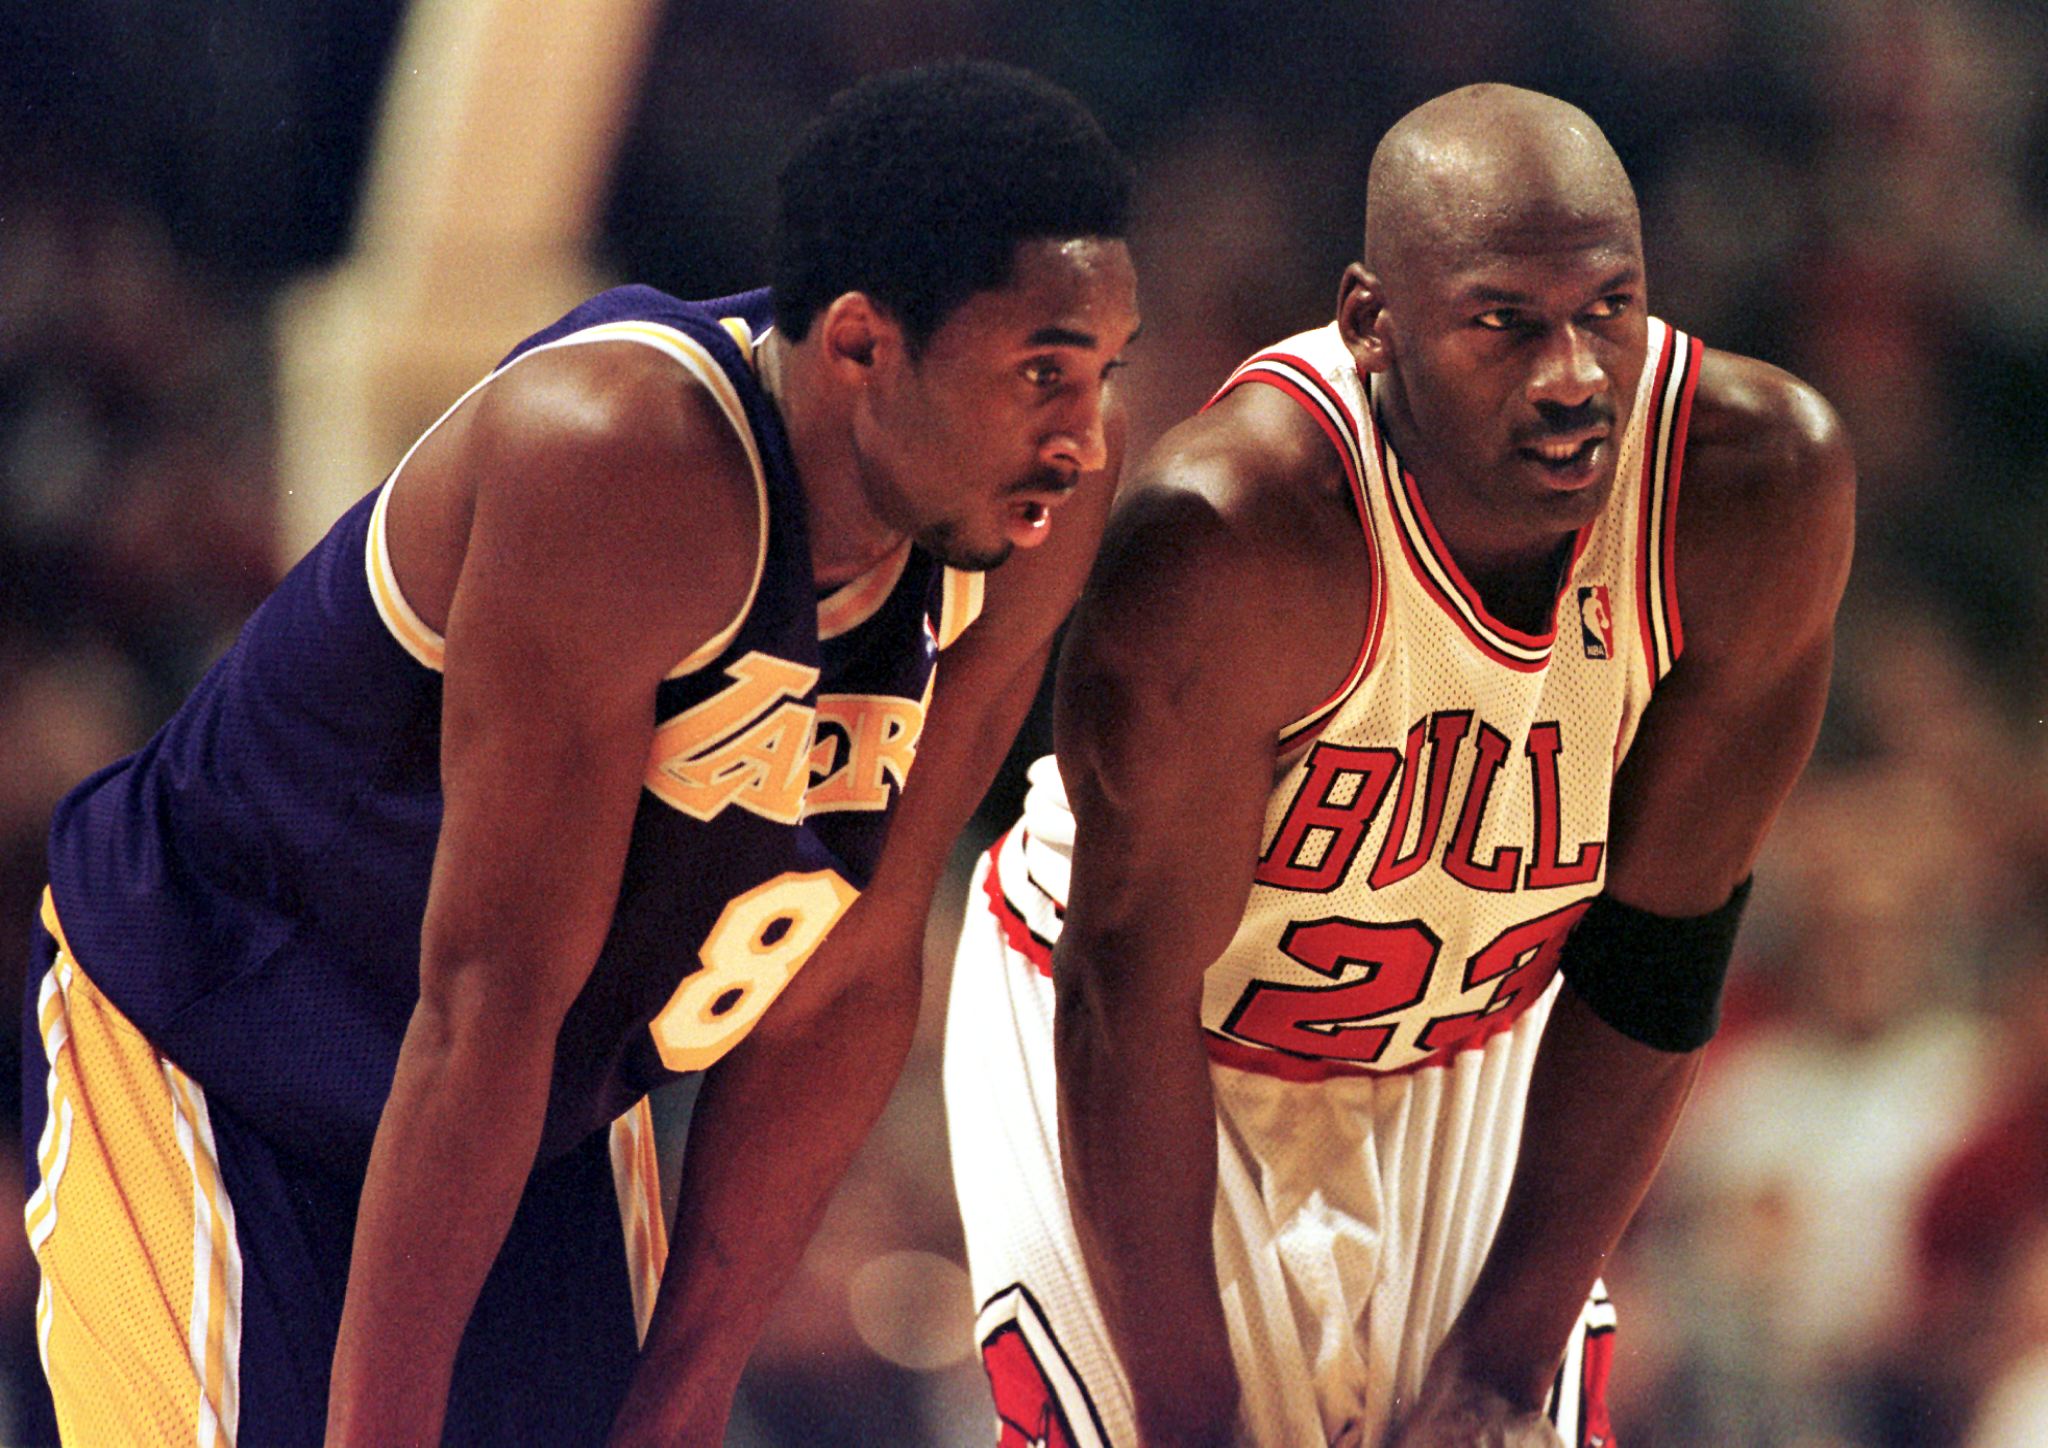 Kobe Bryant and Michael Jordan chatting during a free-throw attempt in the fourth quarter of the game between the Los Angeles Lakers and the Chicago Bulls on December 17, 1997, at the United Center in Chicago. | Source: Getty Images